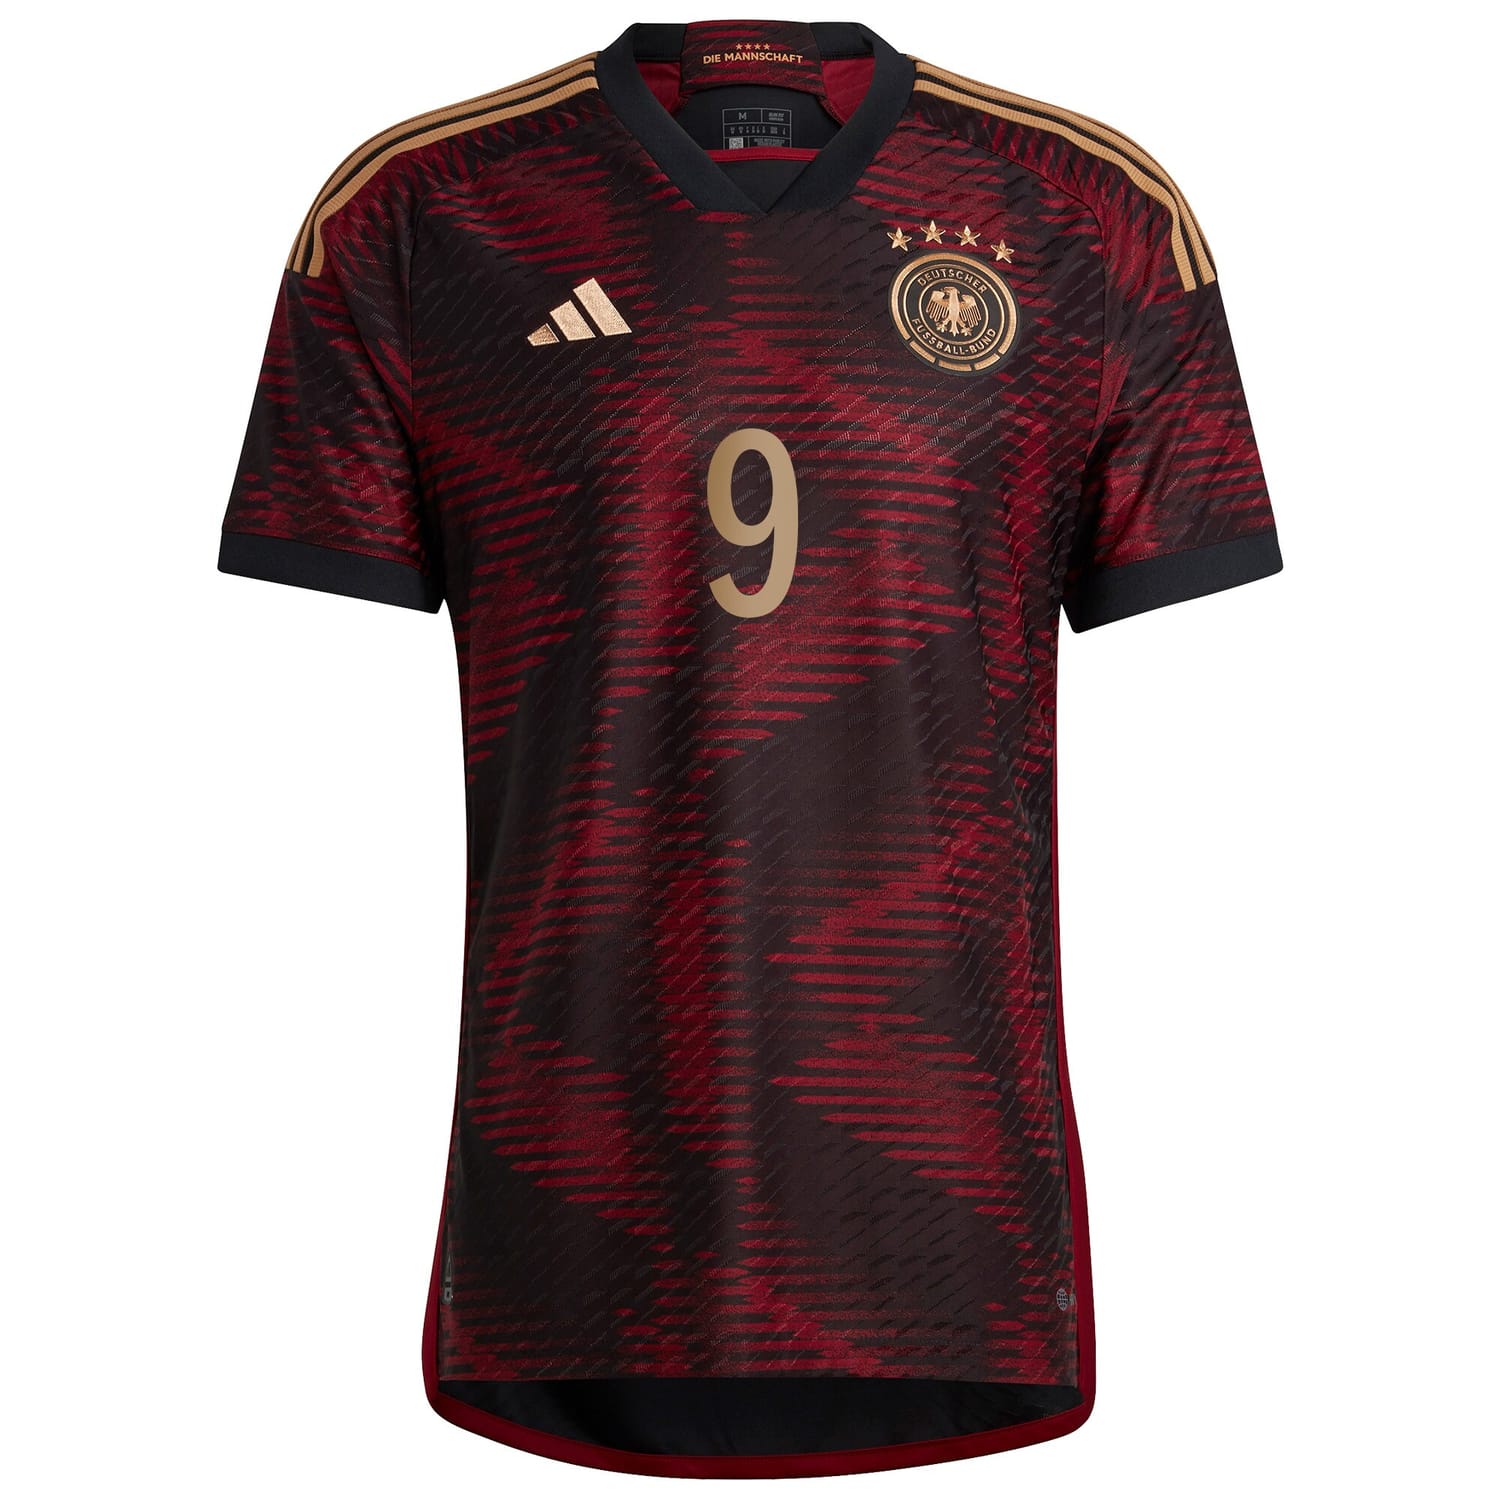 Germany National Team Away Authentic Jersey Shirt Black 2022-23 player Timo Werner printing for Men